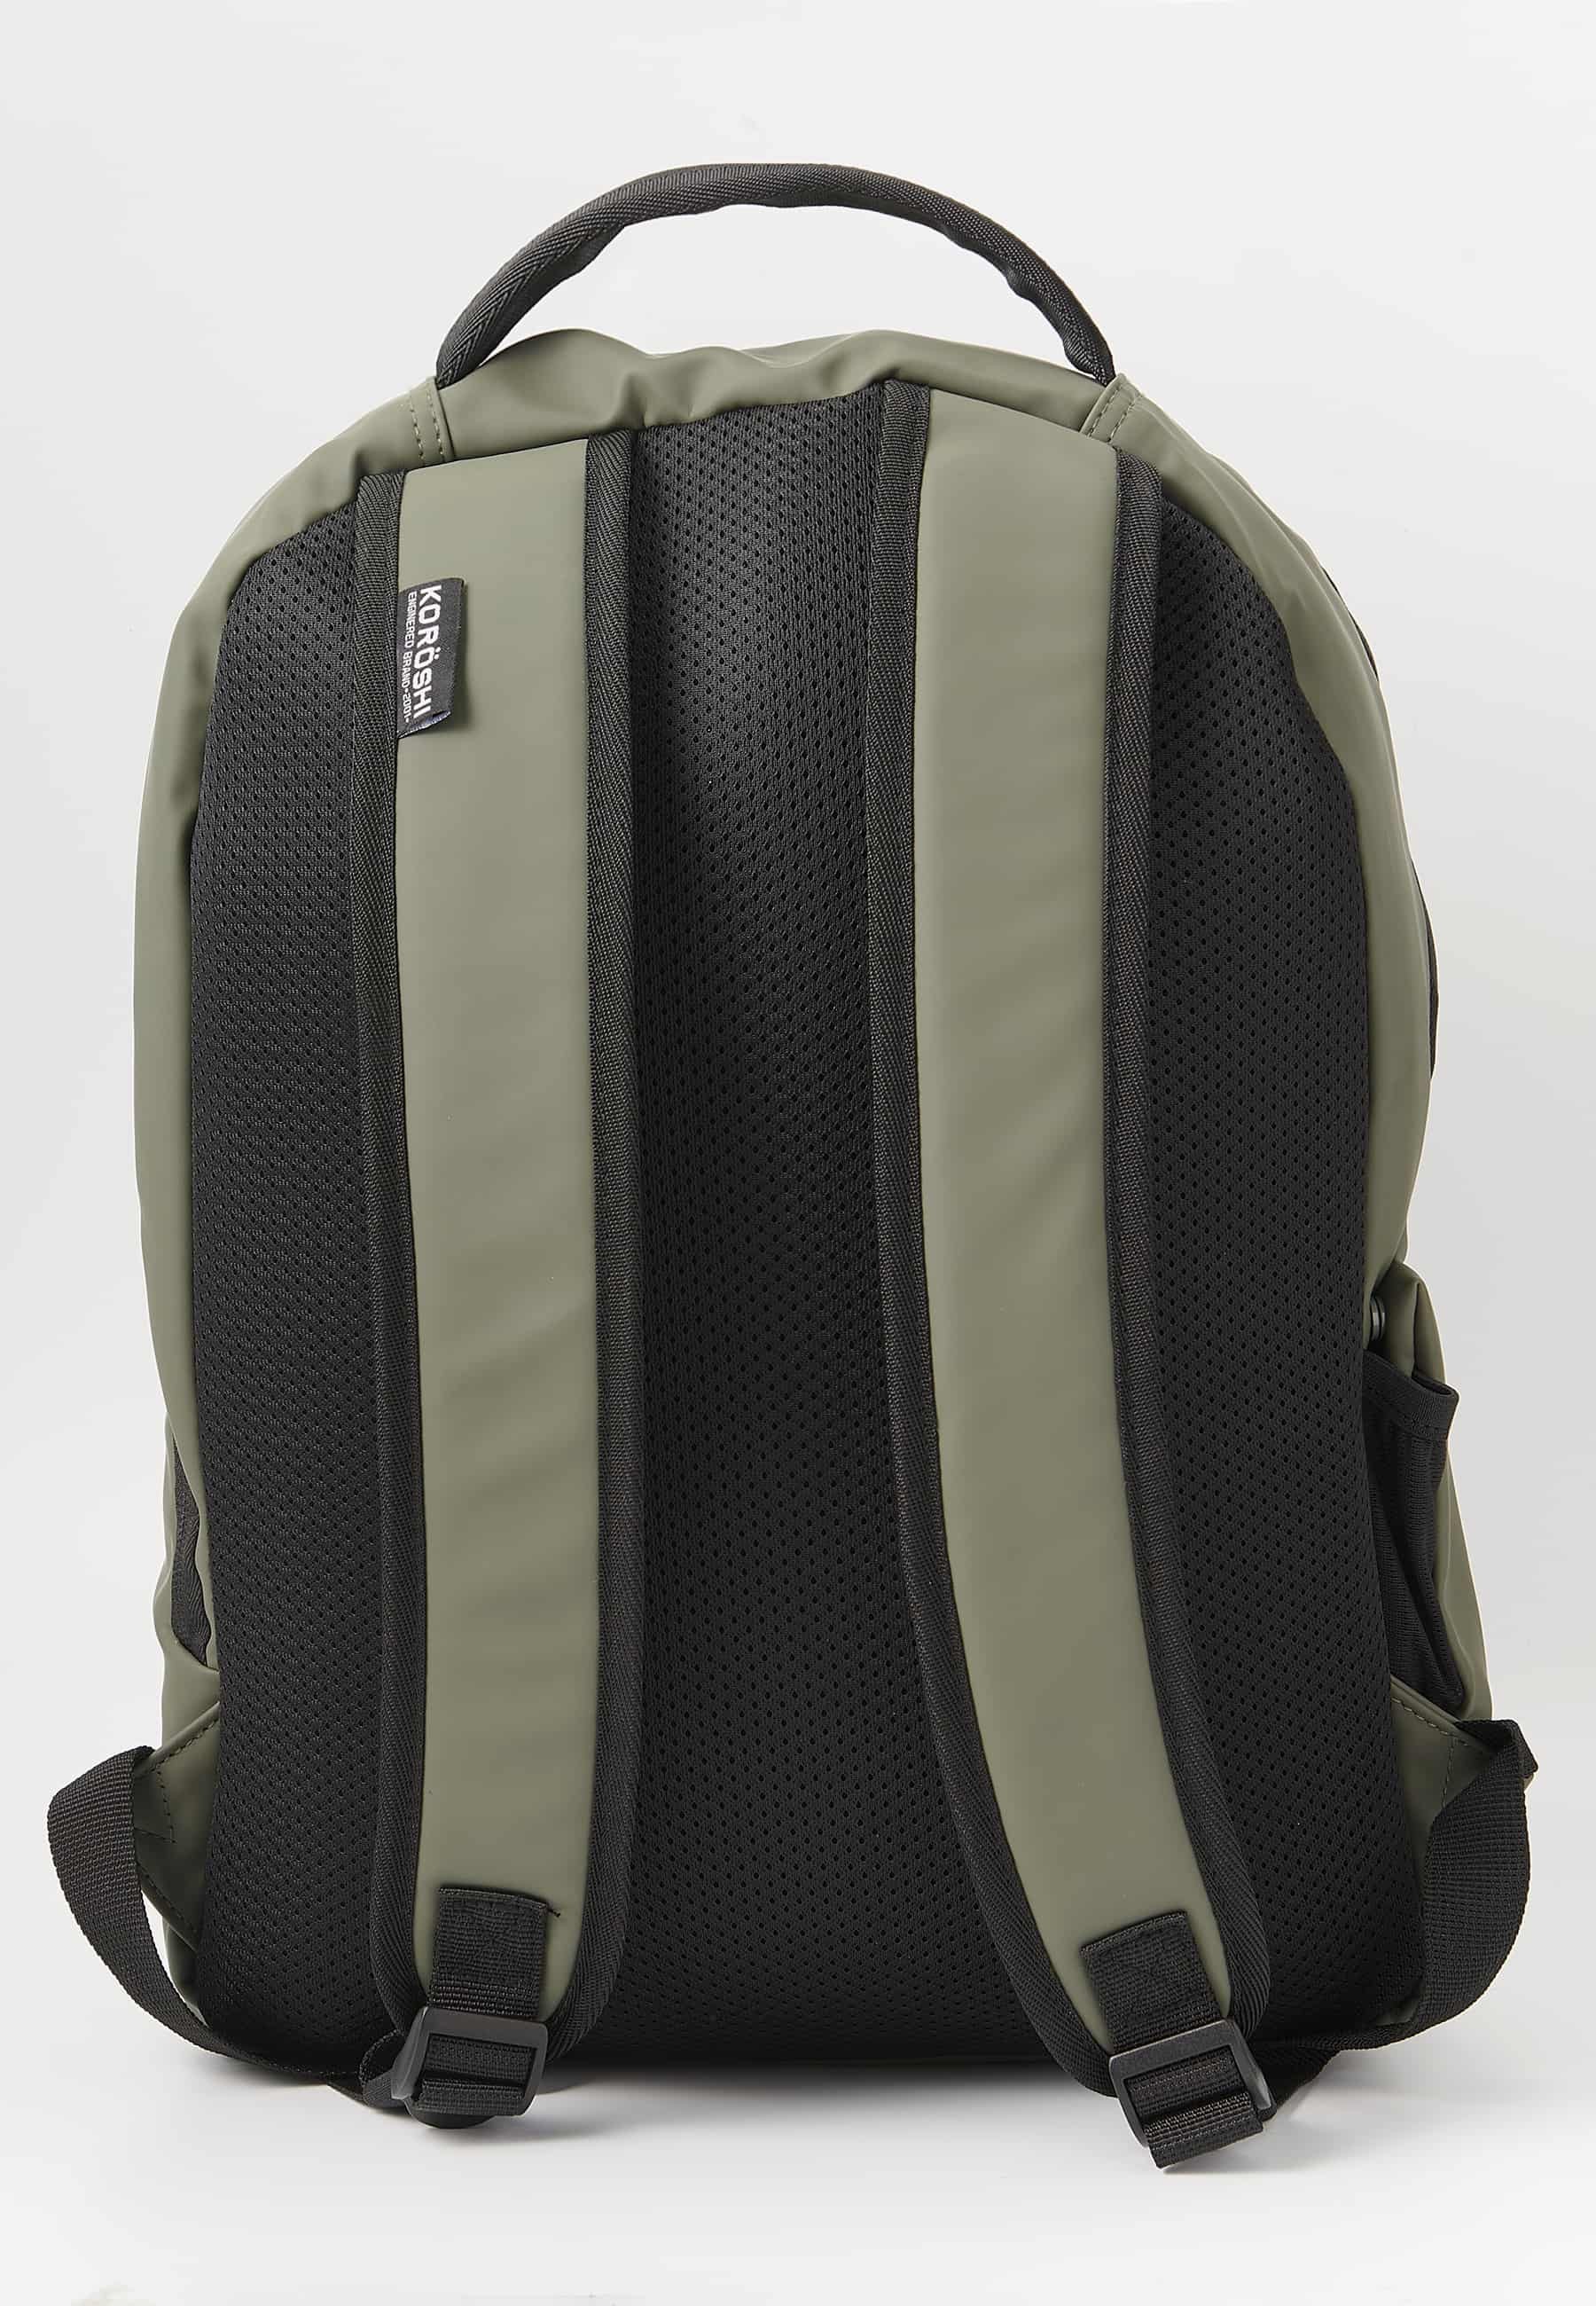 Koröshi Backpack with zipper closure and interior laptop pocket in Khaki color